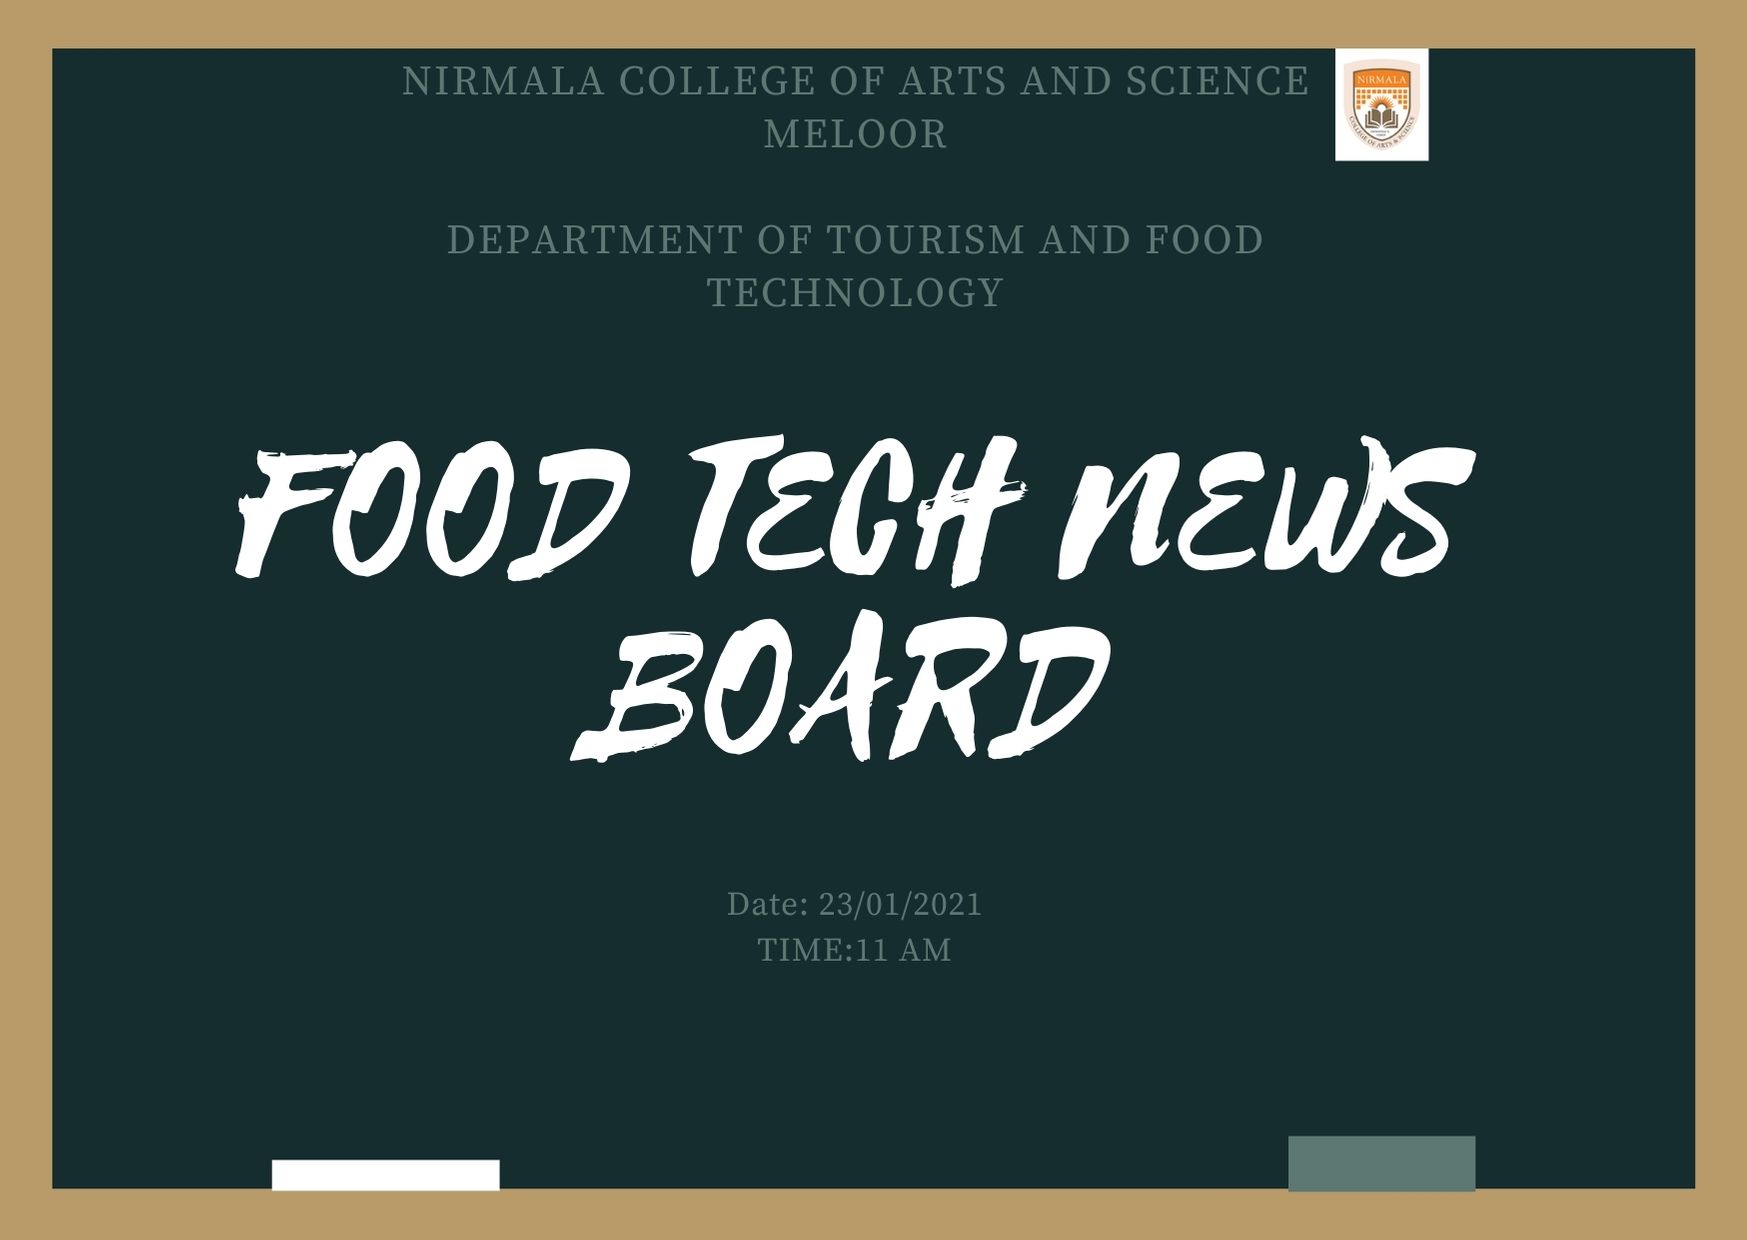 The Department of Tourism and Food Technology is organizing a program titled 